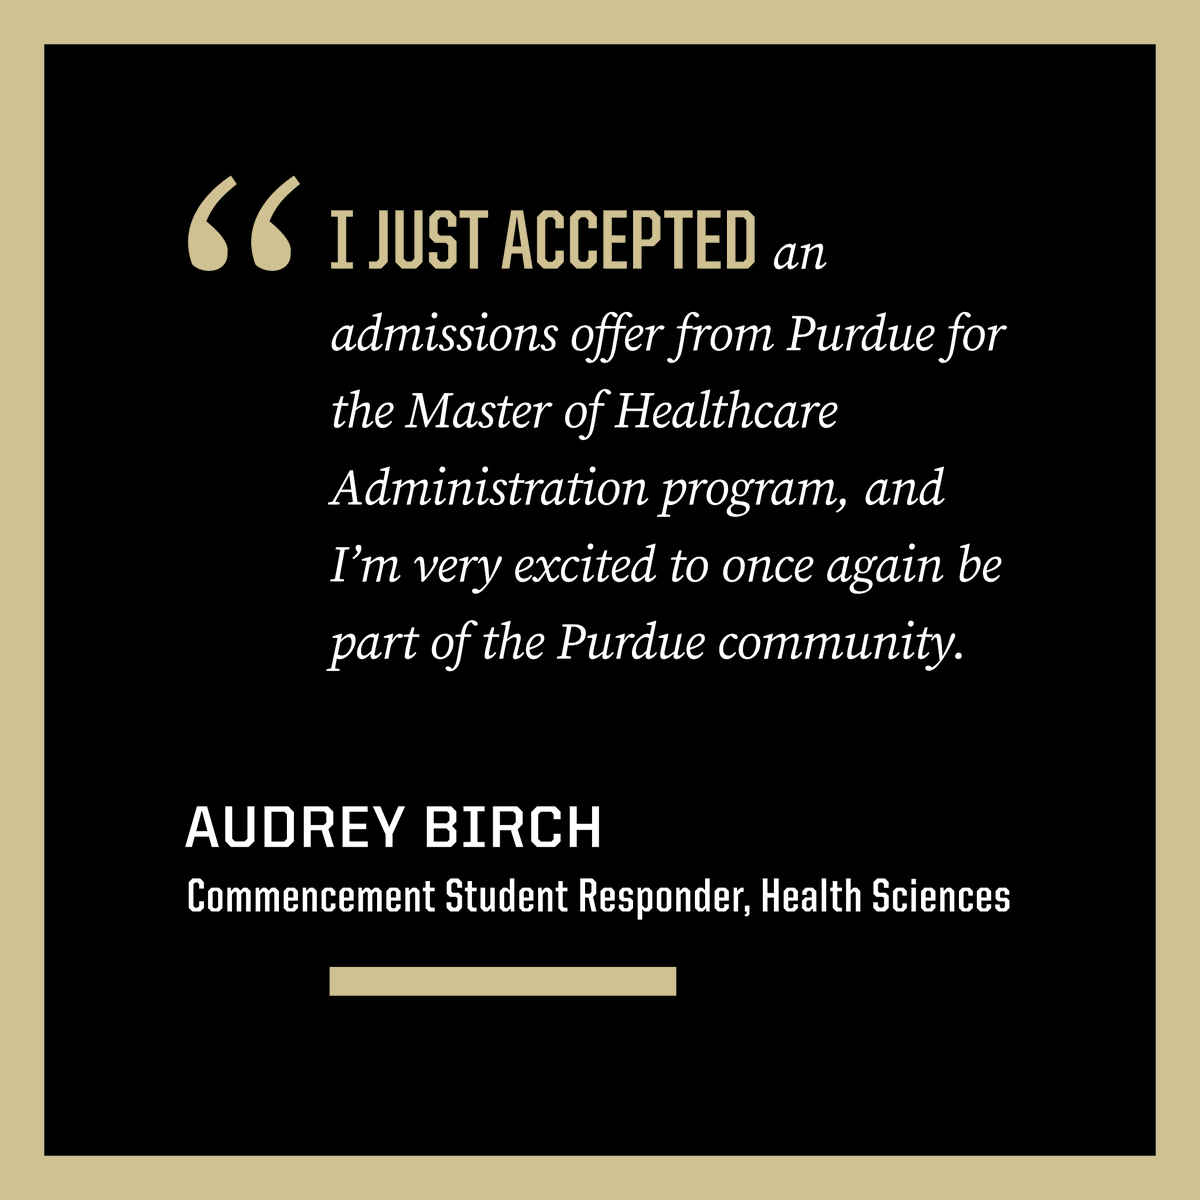 🎓On Sunday, Audrey Birch will receive her bachelor's degree from @PurdueHSCI in biomedical health sciences. She will also take center stage to deliver an address as the Division III commencement ceremony’s student responder. #PurdueHHS #PurdueUniversity purdue.edu/newsroom/relea…